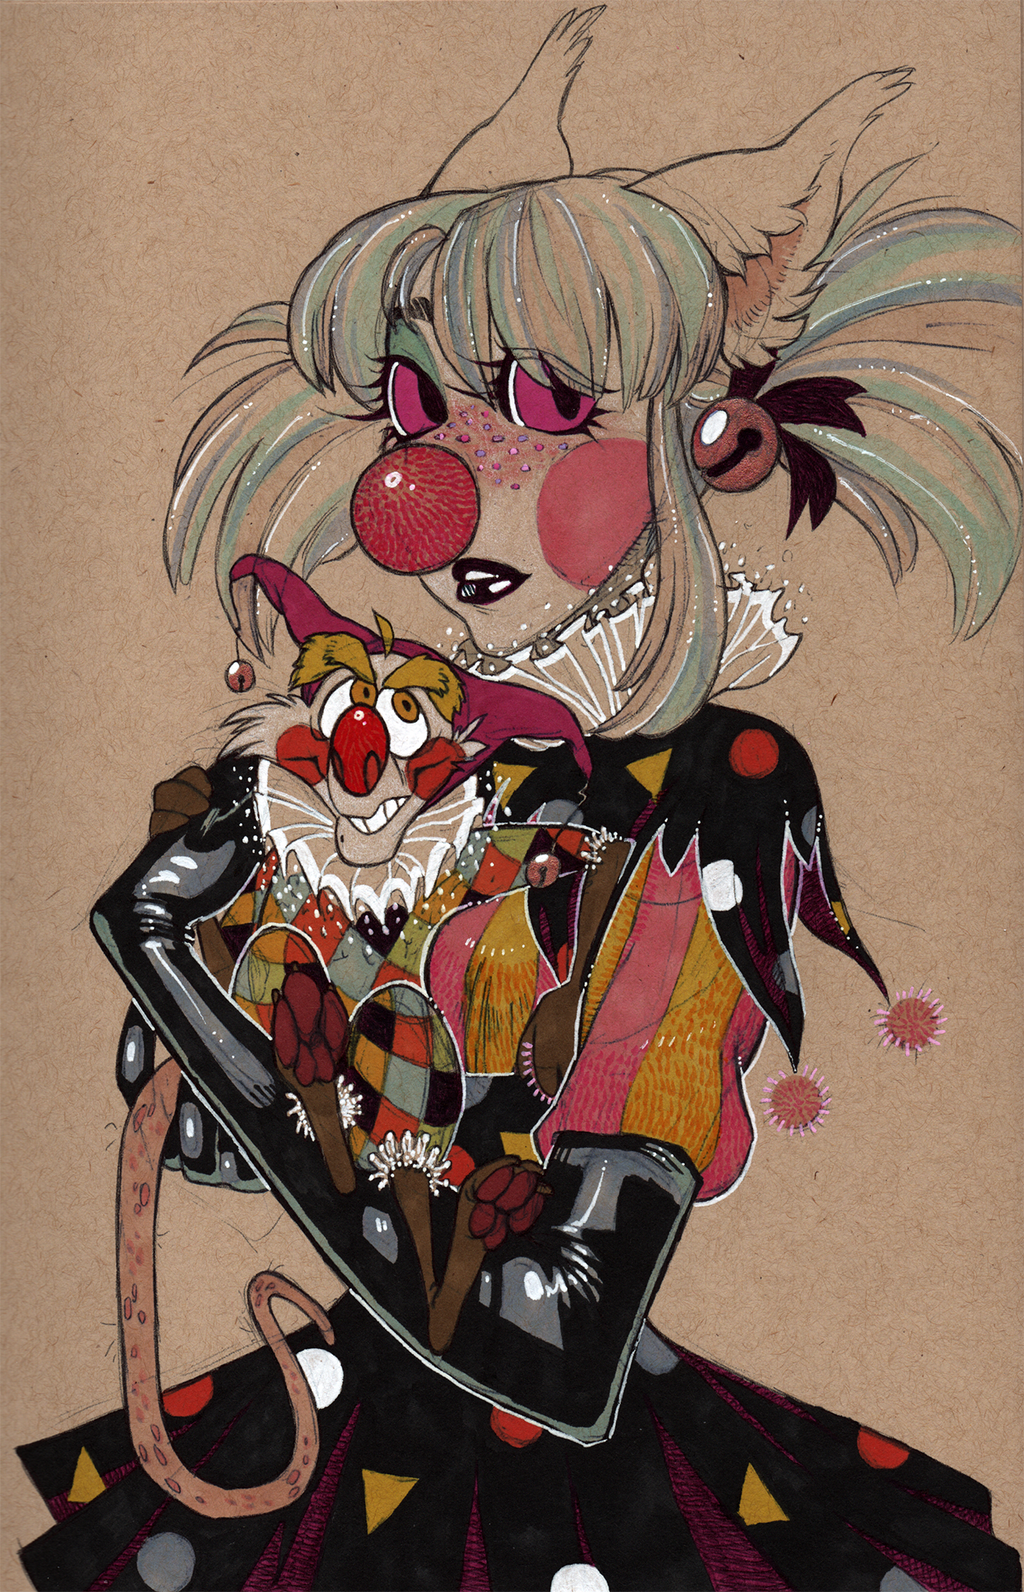 Most recent image: Clown and her creature